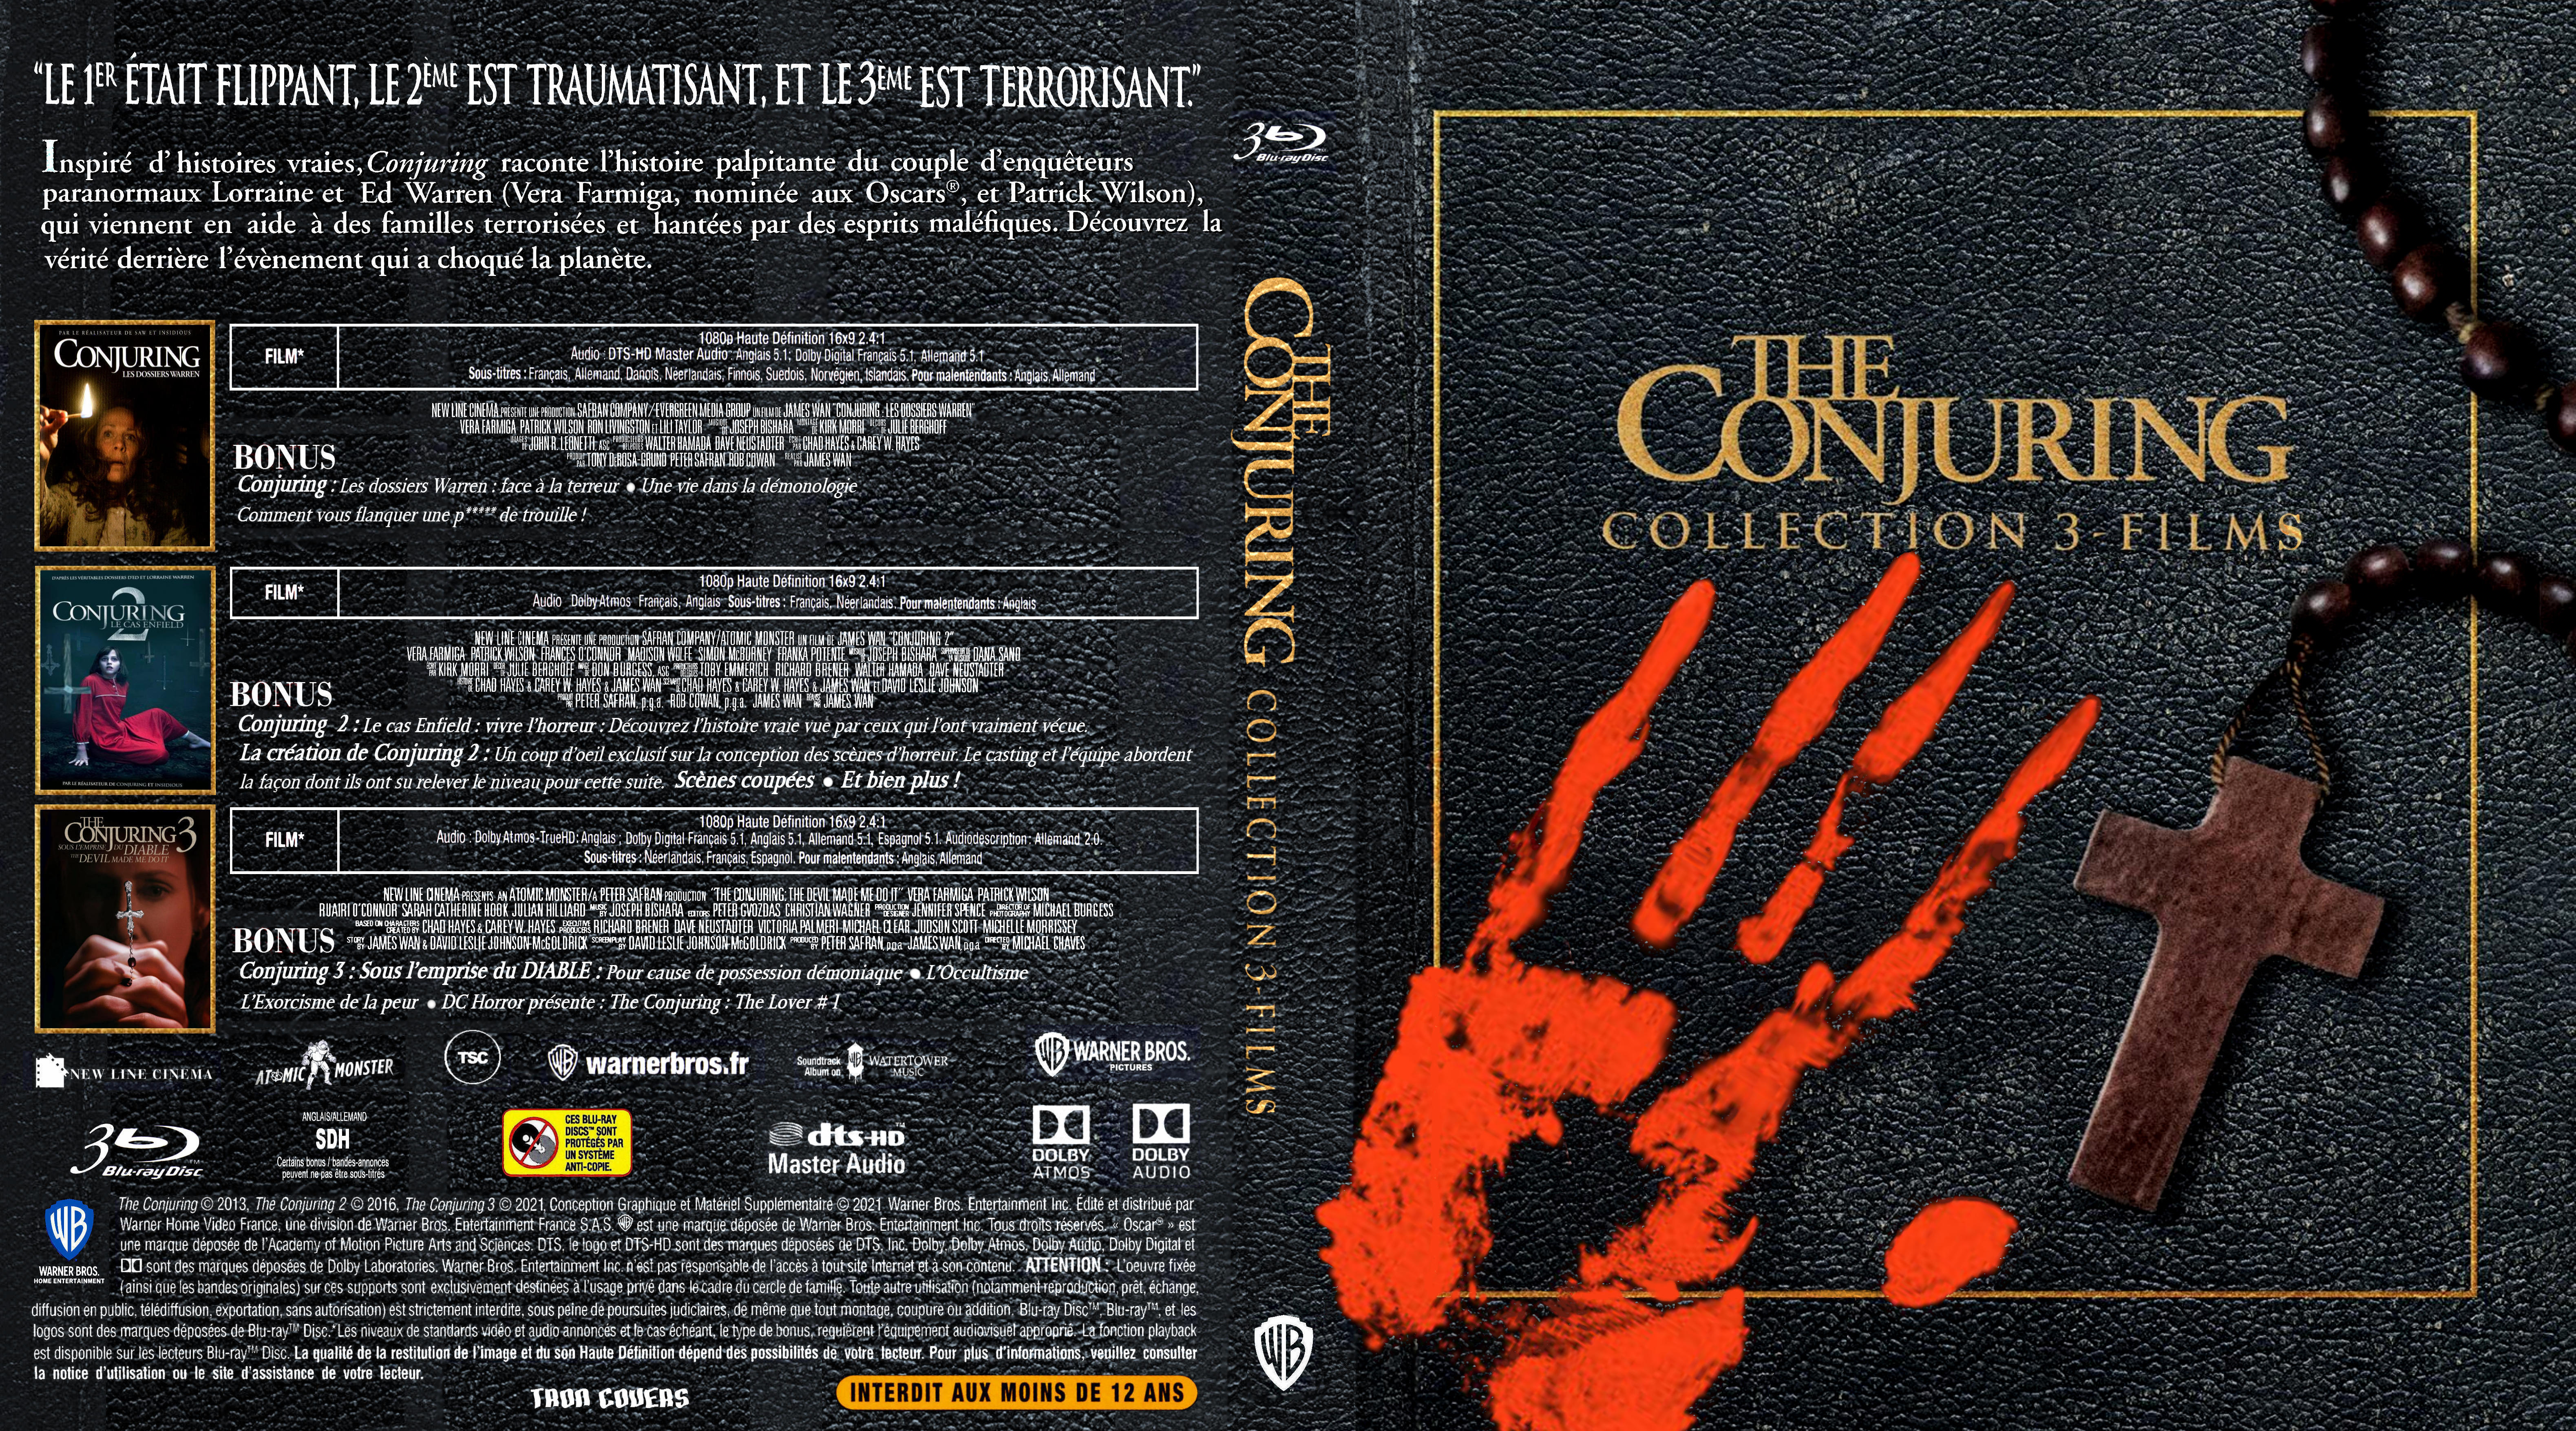 Jaquette DVD Conjuring coffret collection custom (BLU-RAY)